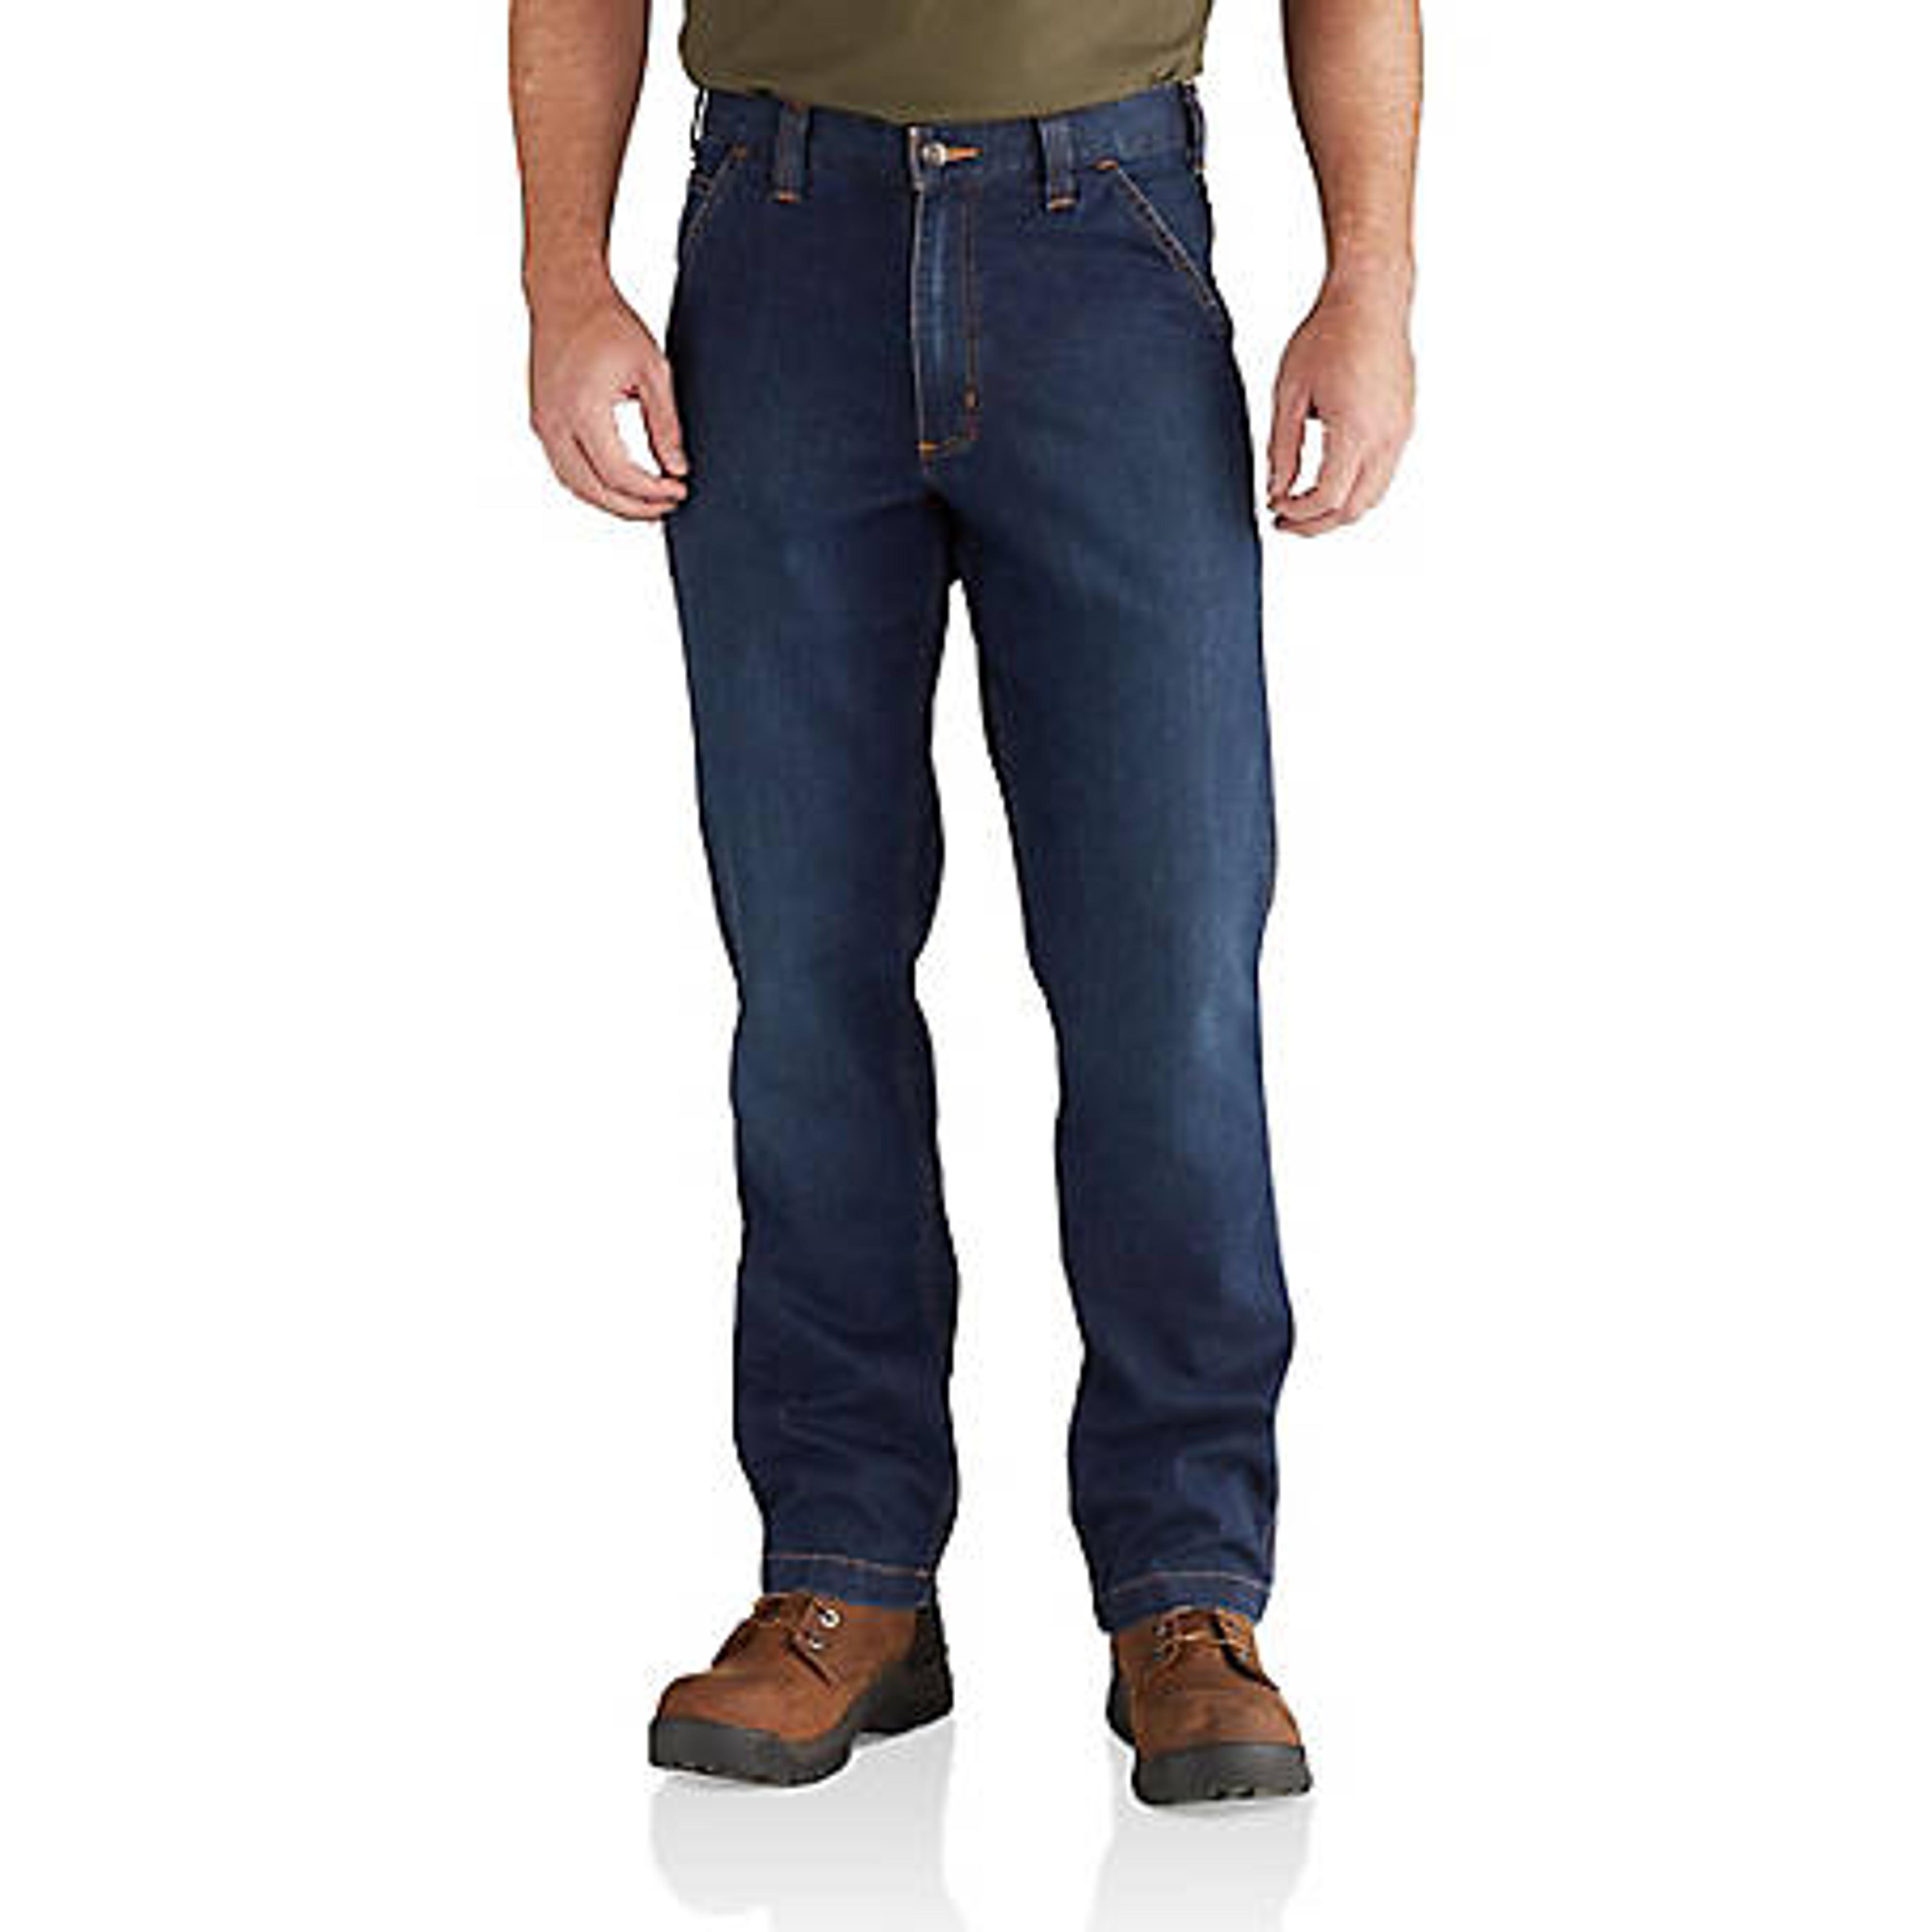  Rugged Flex Relaxed Fit Dungaree Jeans